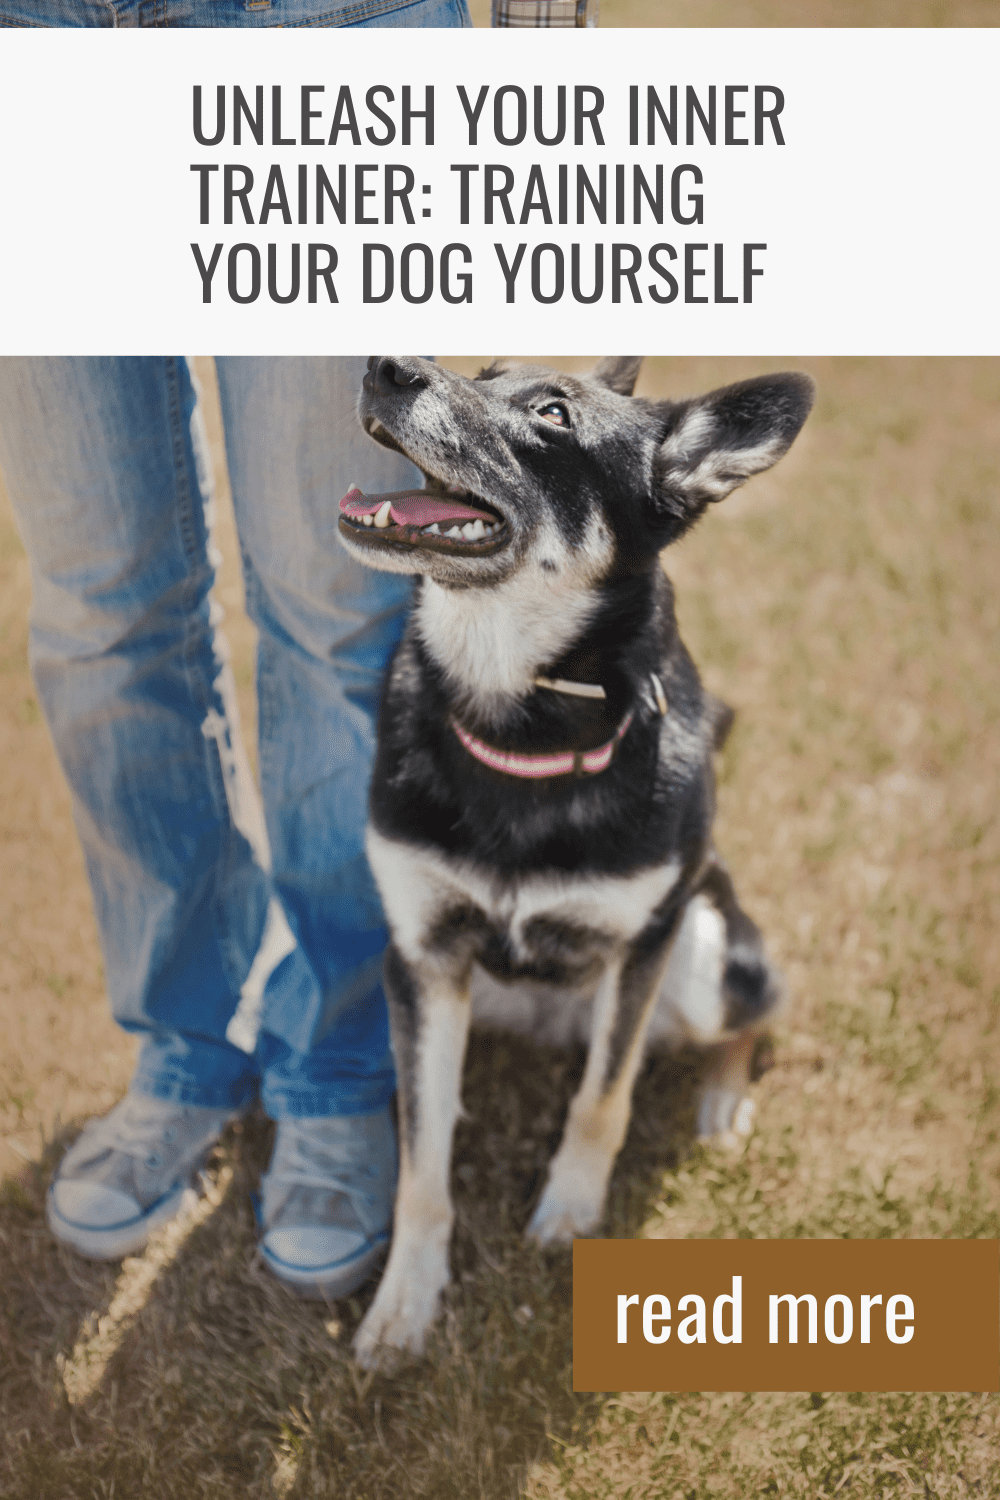 Training Your Dog Yourself